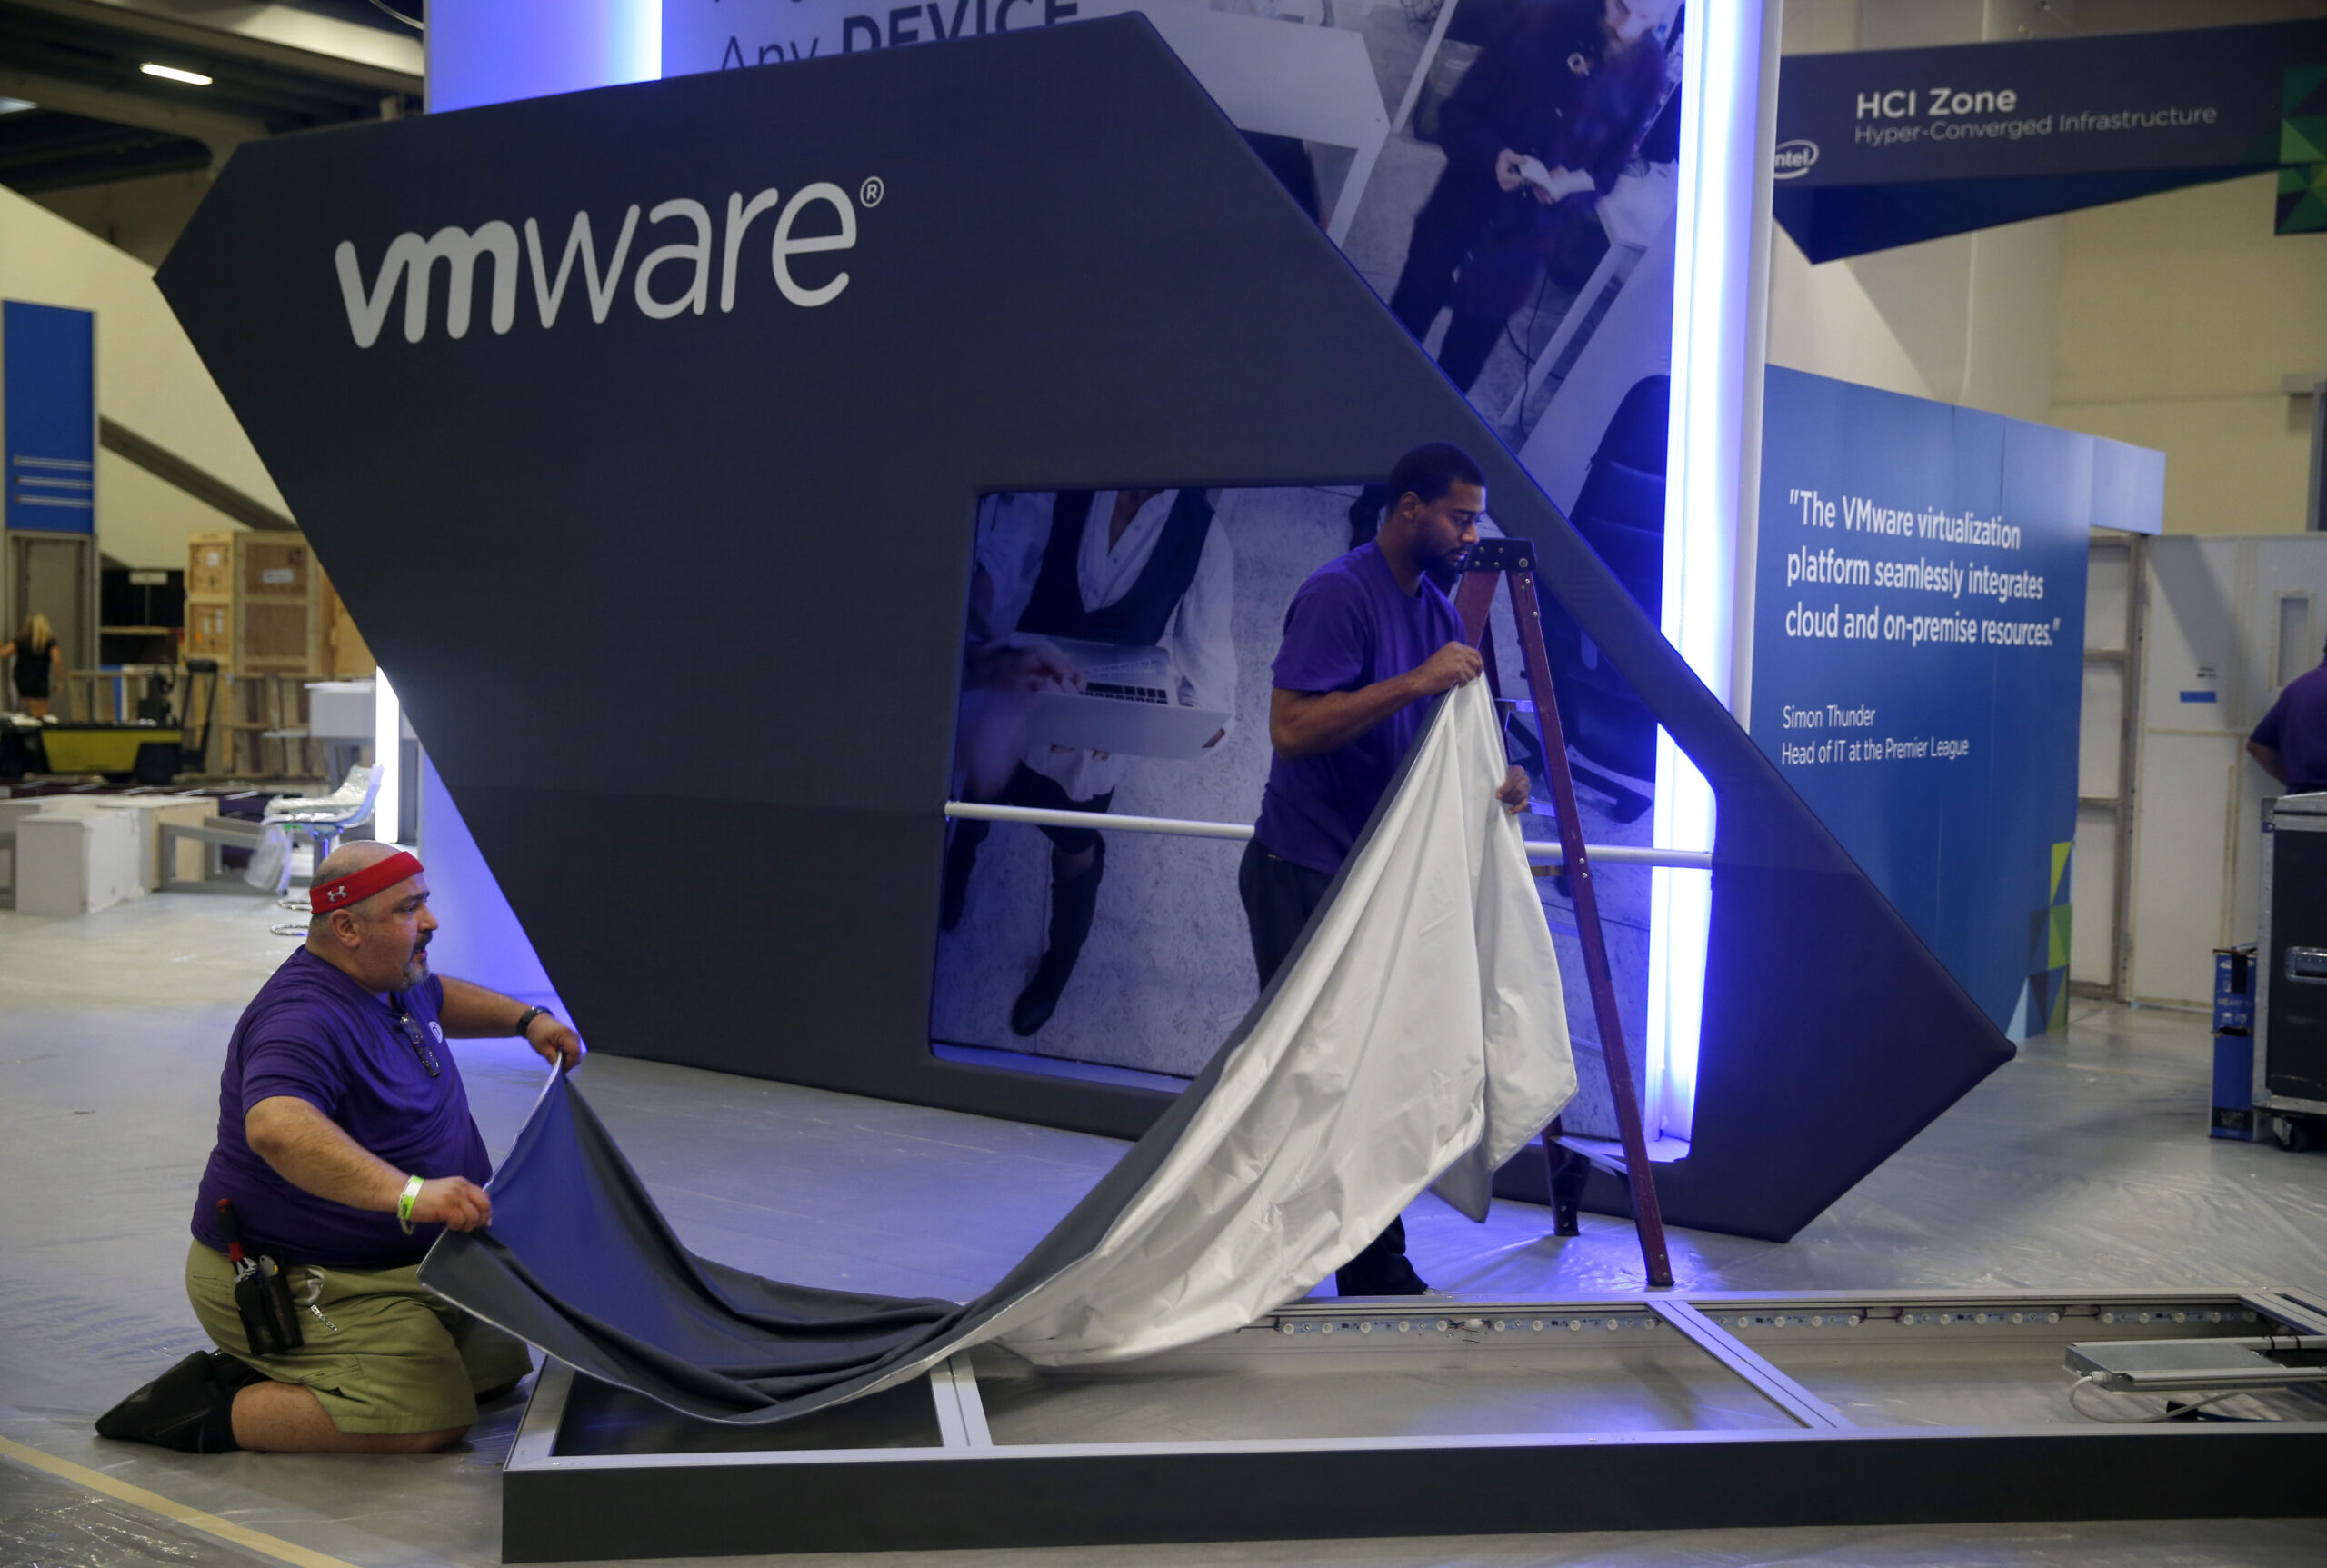 Two men set up a large VMware booth displaying tech branding and quotes at an event venue.